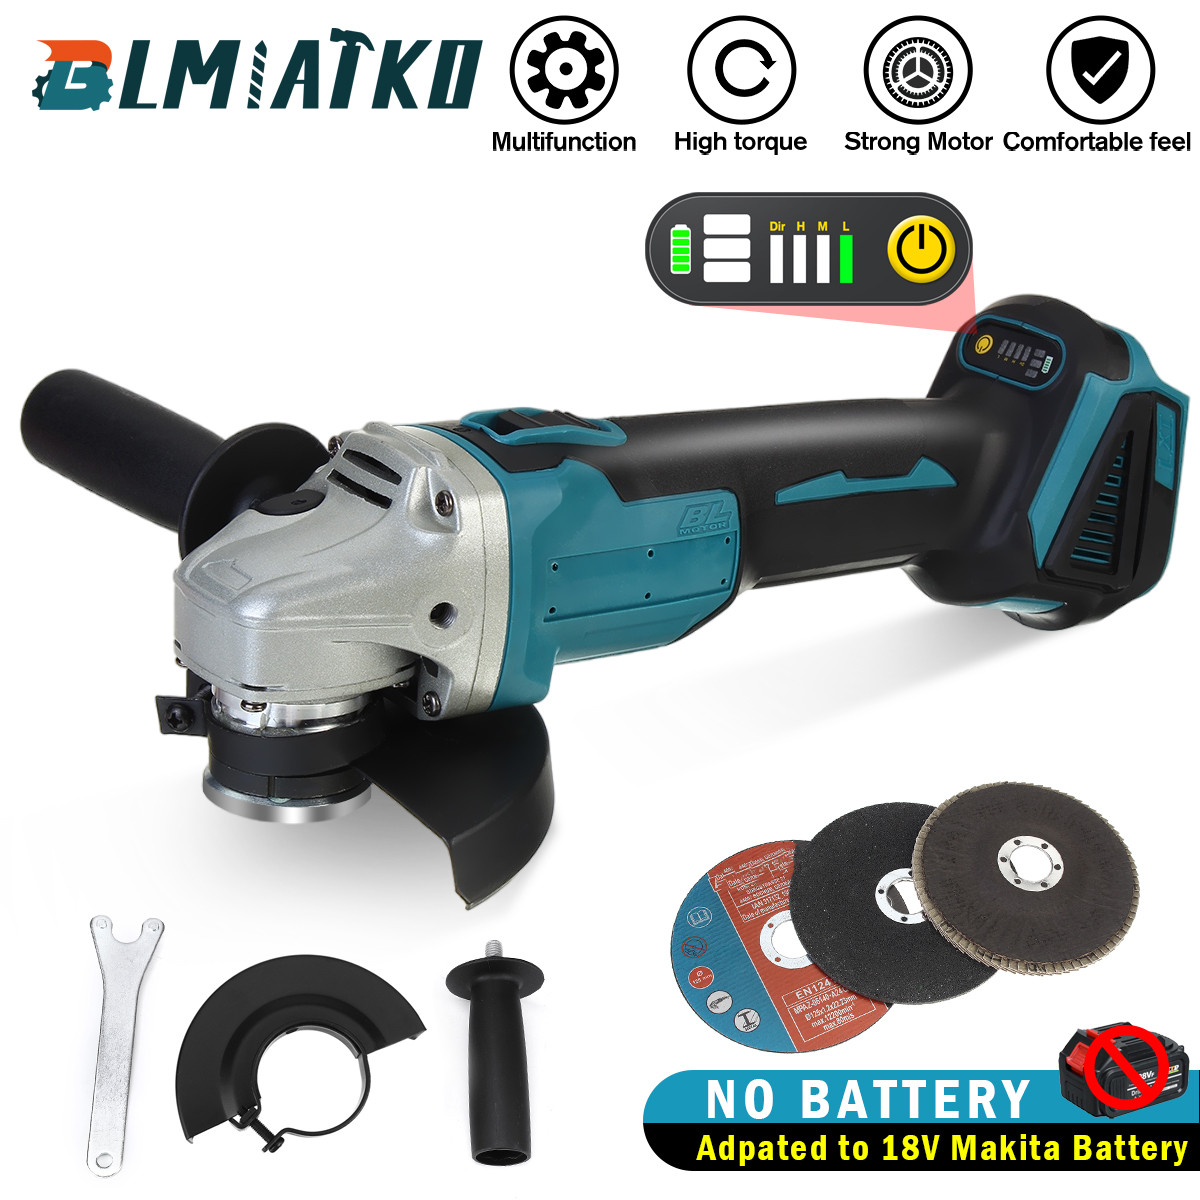 BLMIATKO-18V-860W-4-Speed-Regulated-Cordless-Brushless-Angle-Grinder-For-Makita-Battery-Electric-Gri-1715153-1